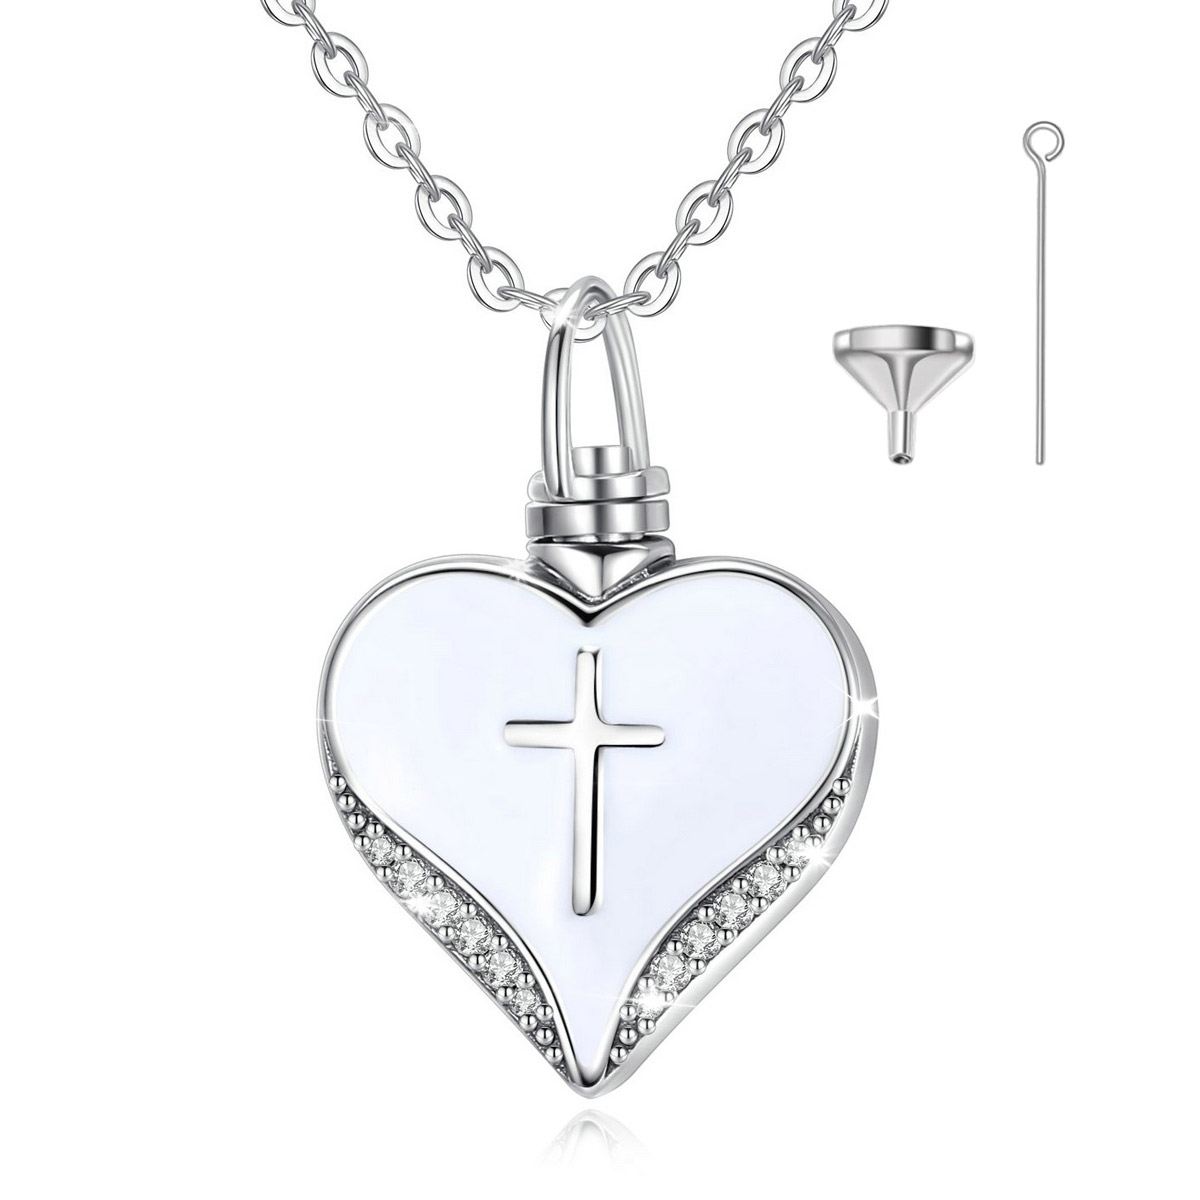 Merryshine Jewelry Silver keepsake cremation jewelry urn ashes memorial pendant necklace